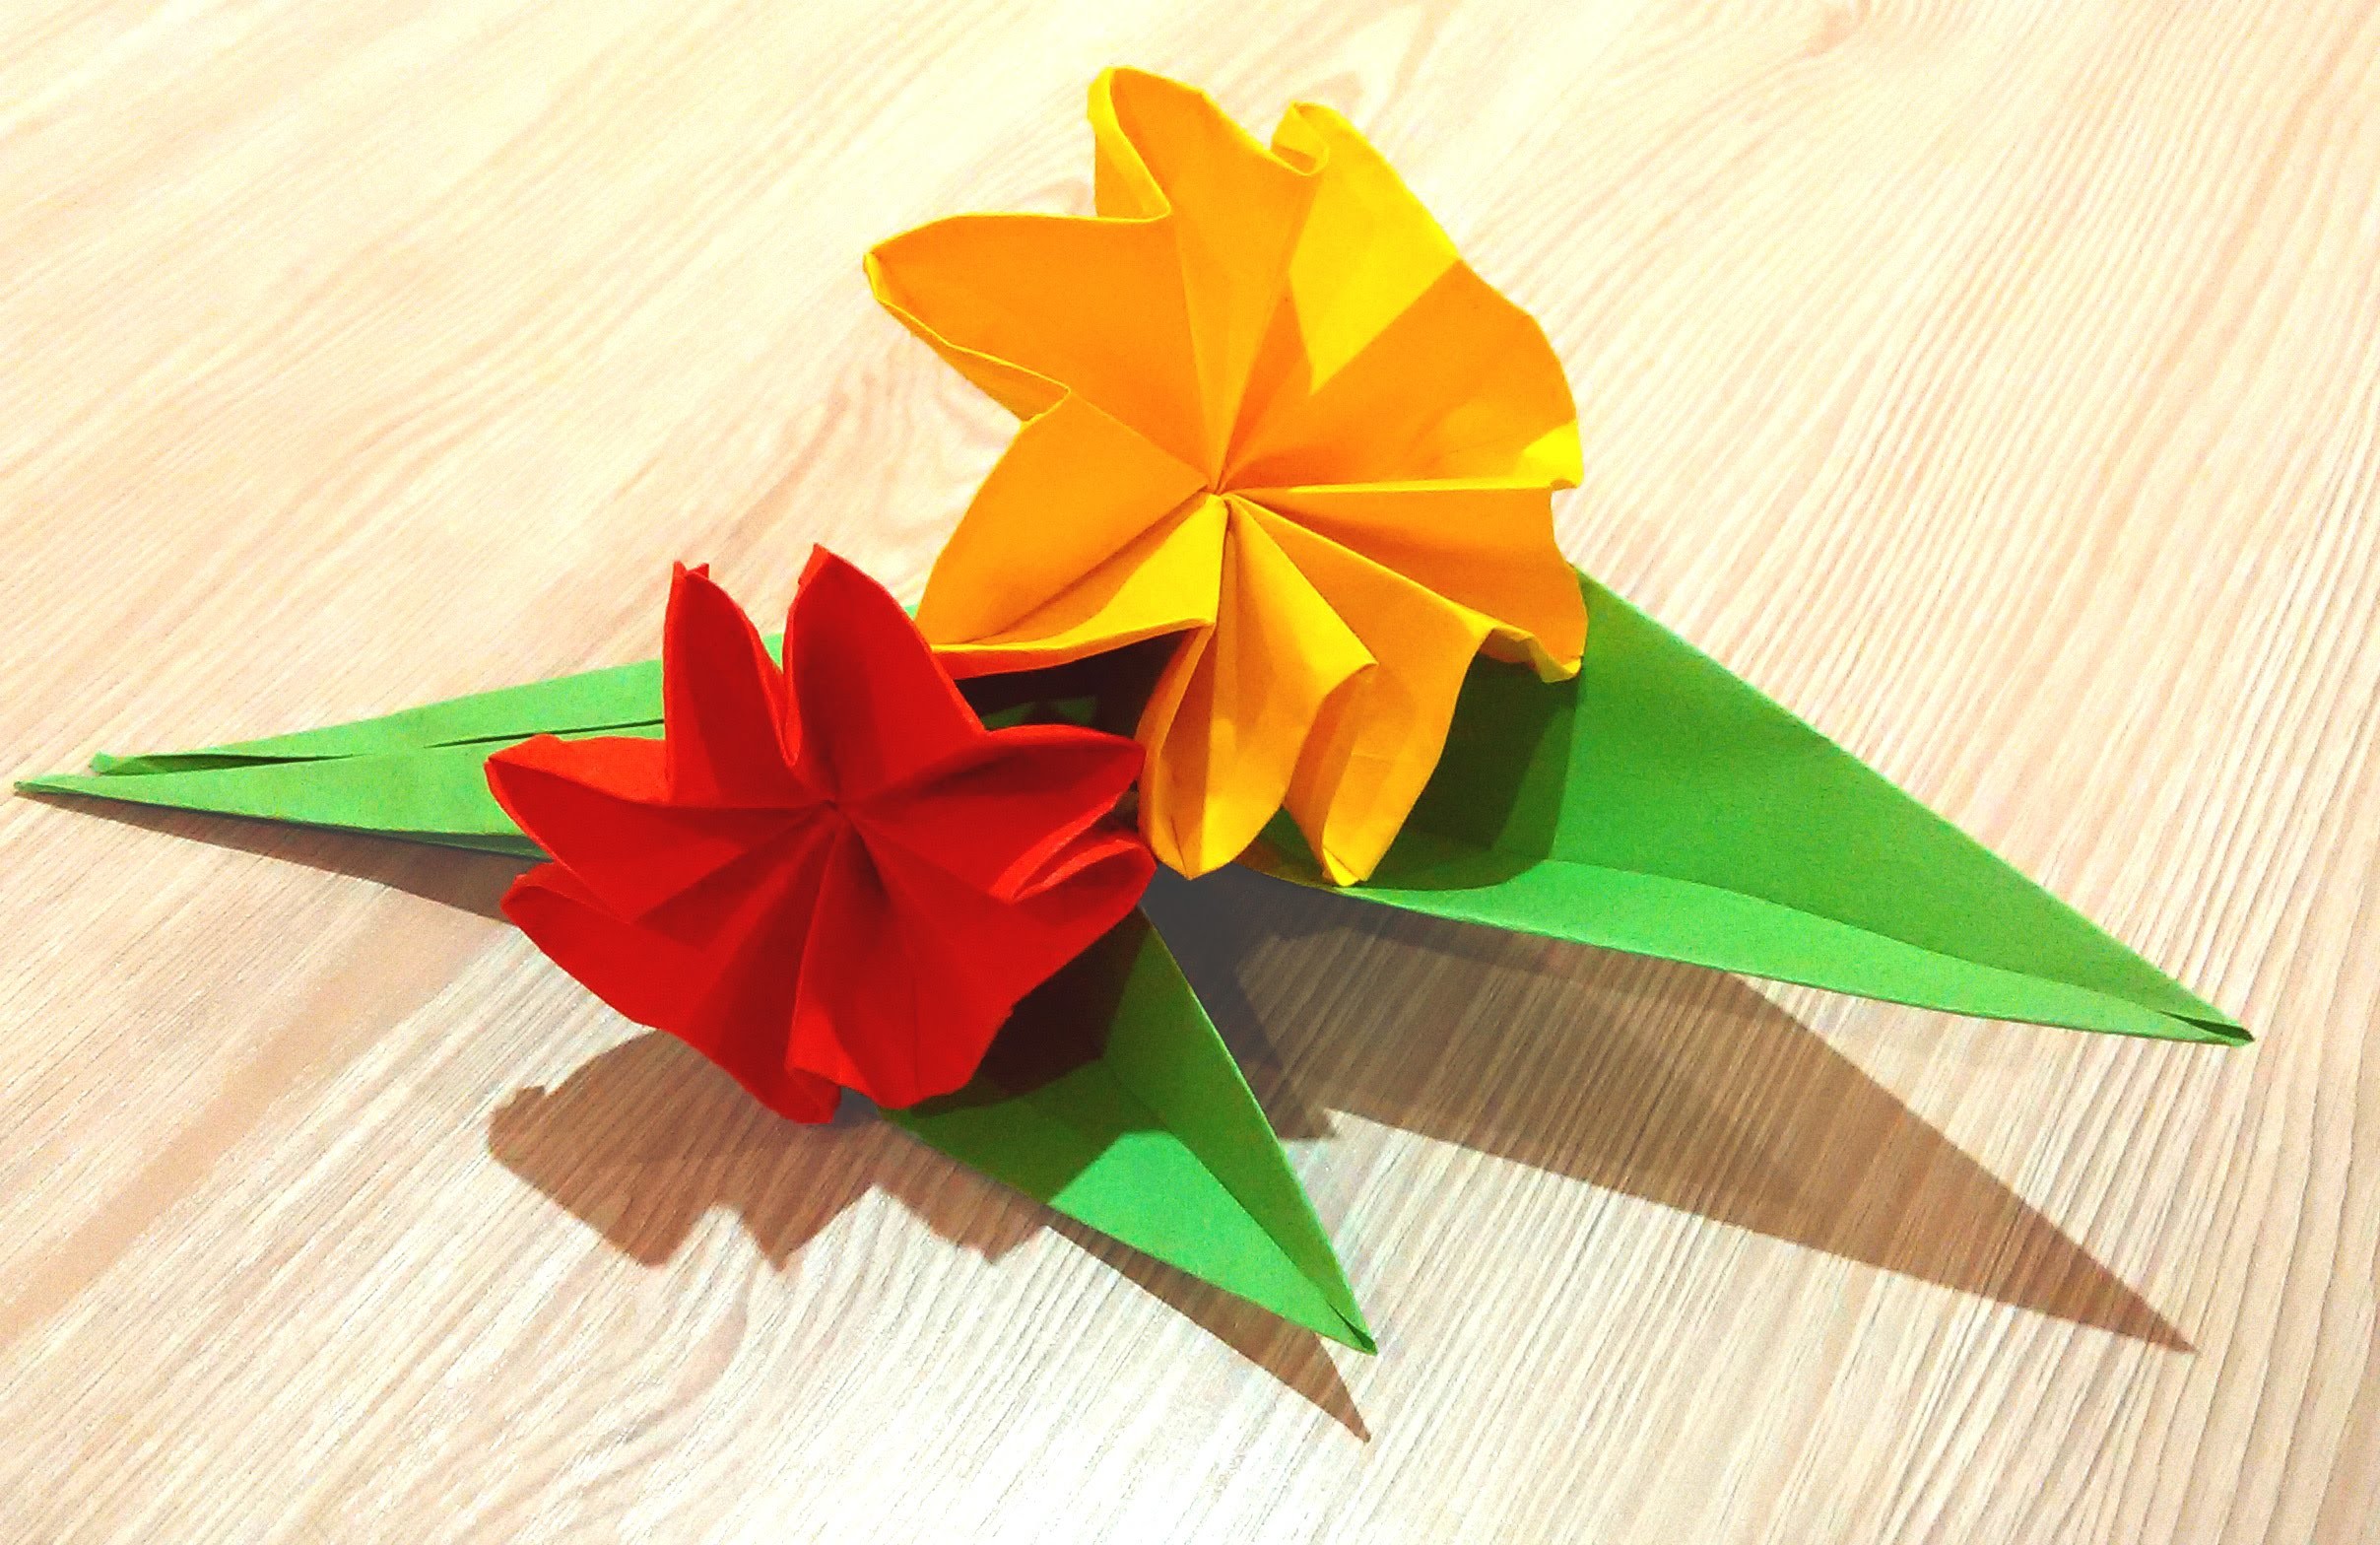 easy-quick-origami-flower-step-wikihow-simples-origamitheory-paper-craft